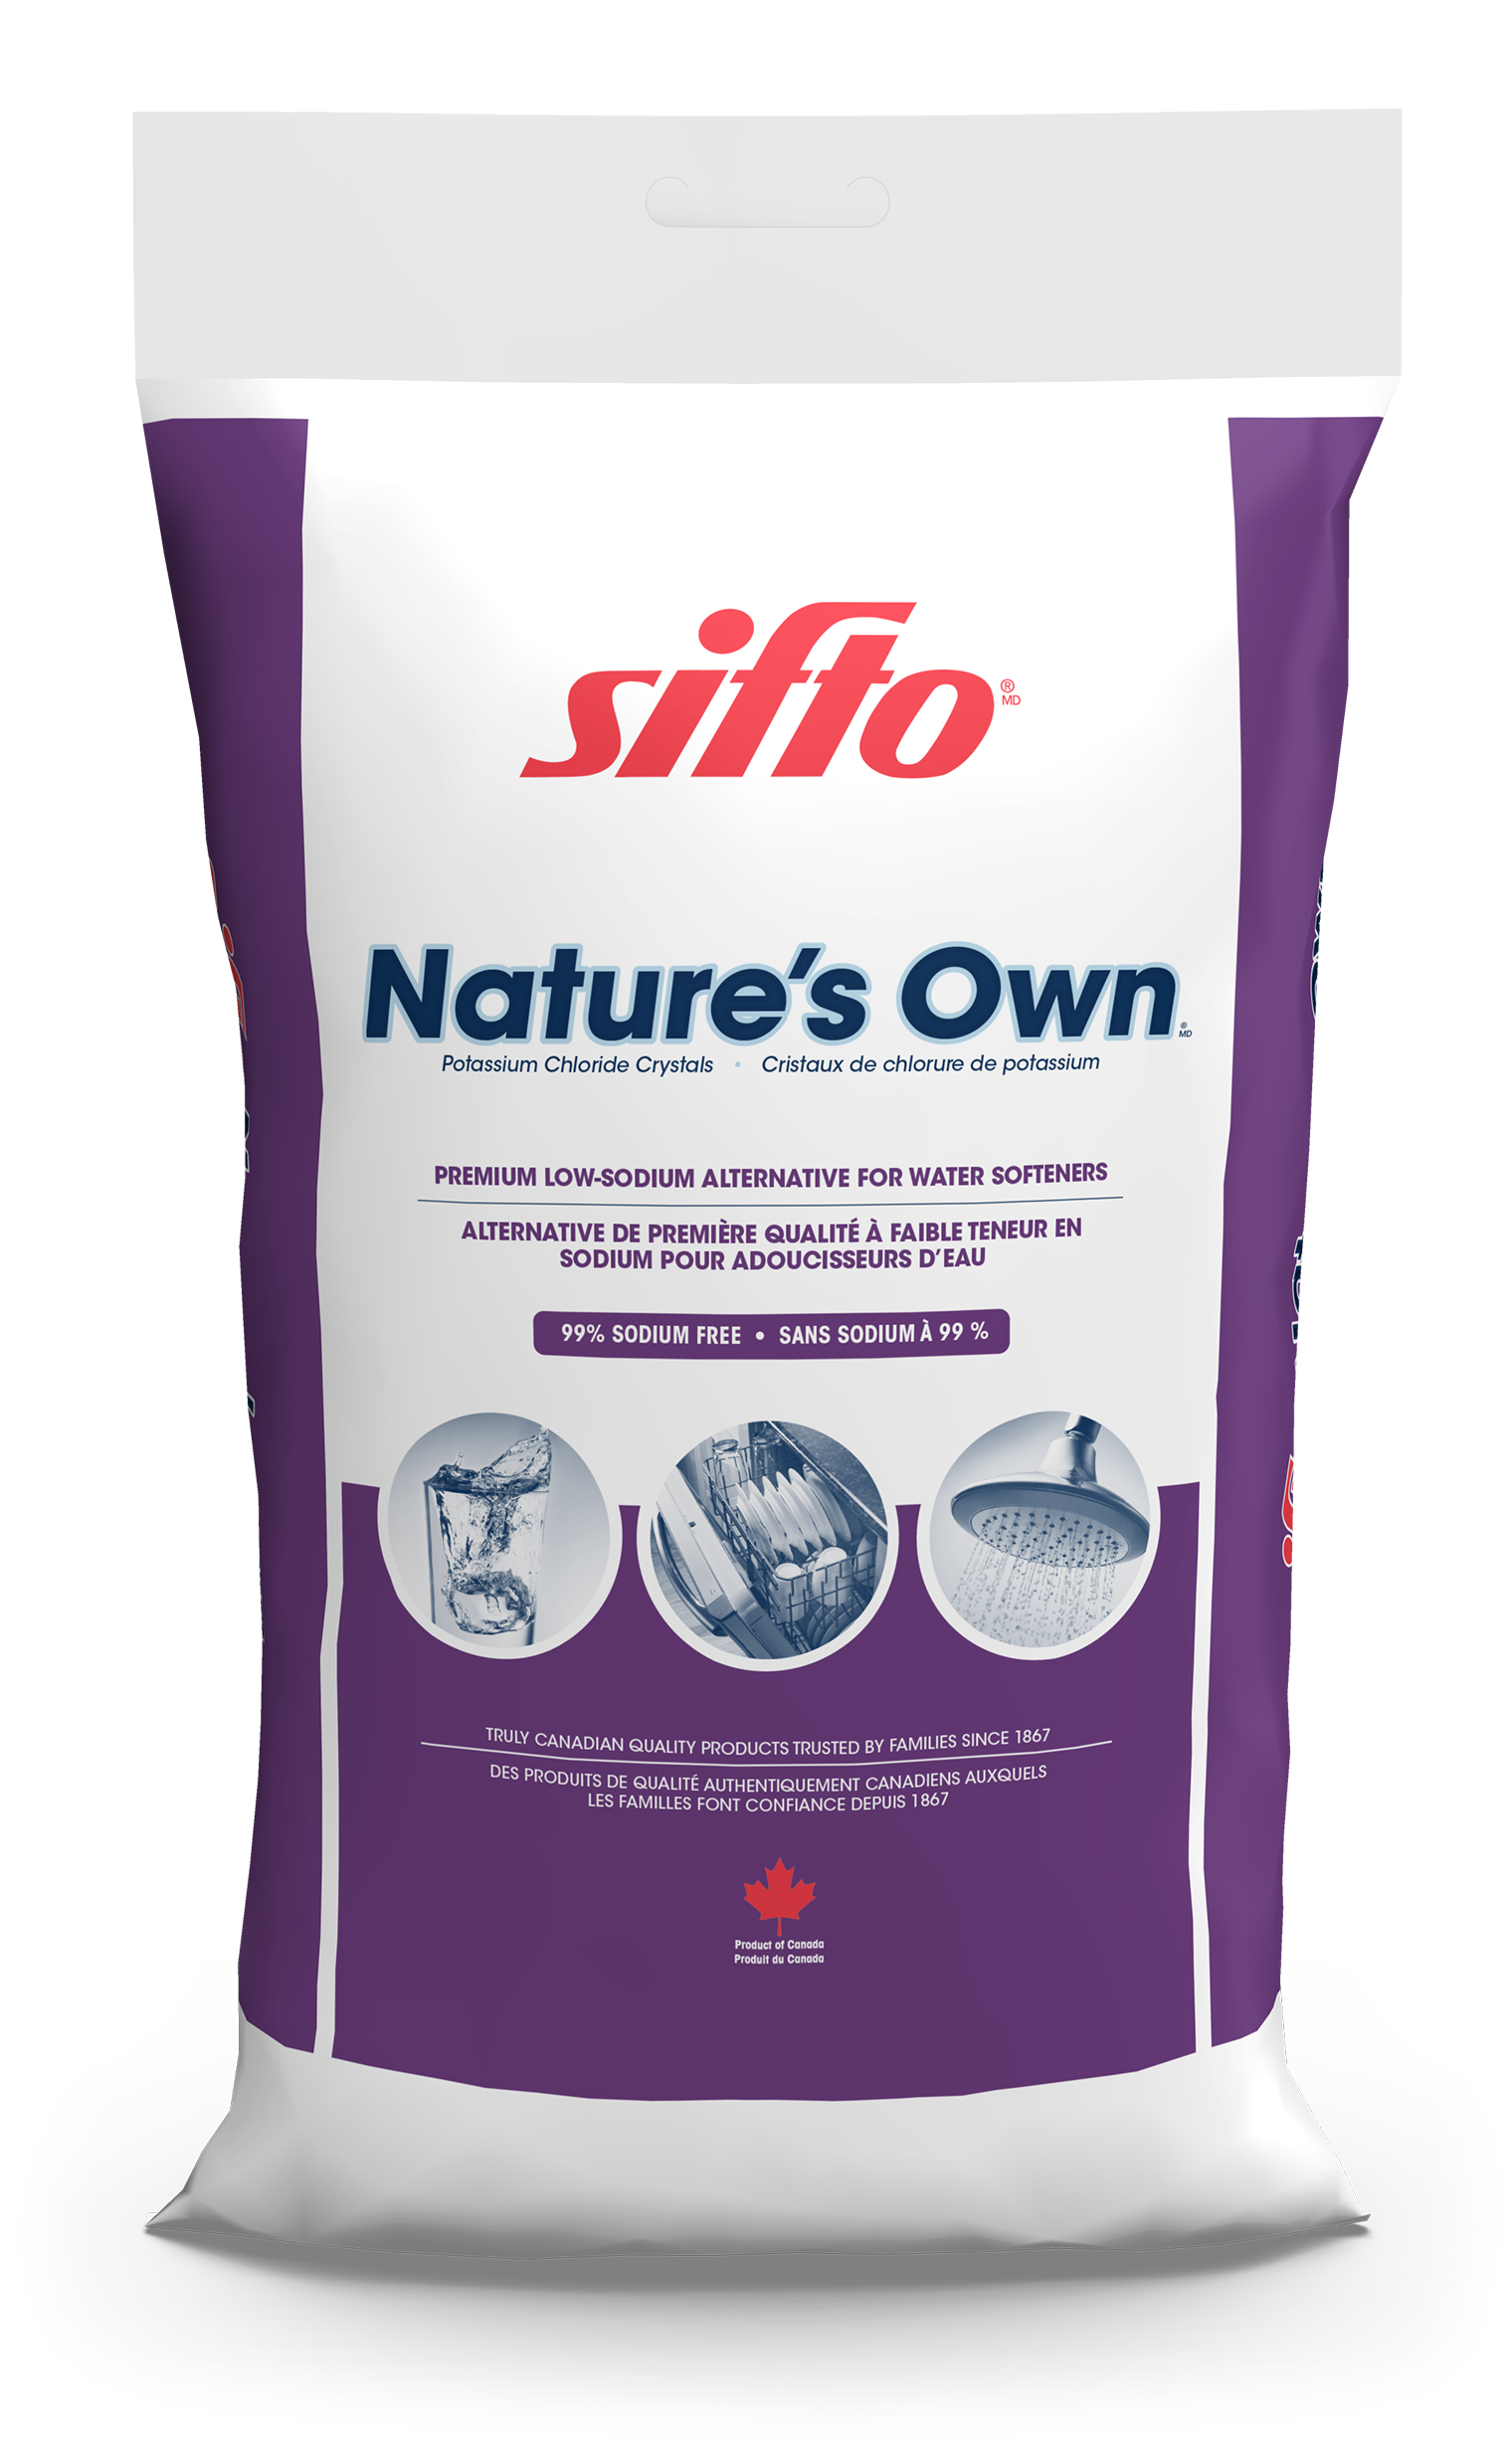 Sifto Nature's Own